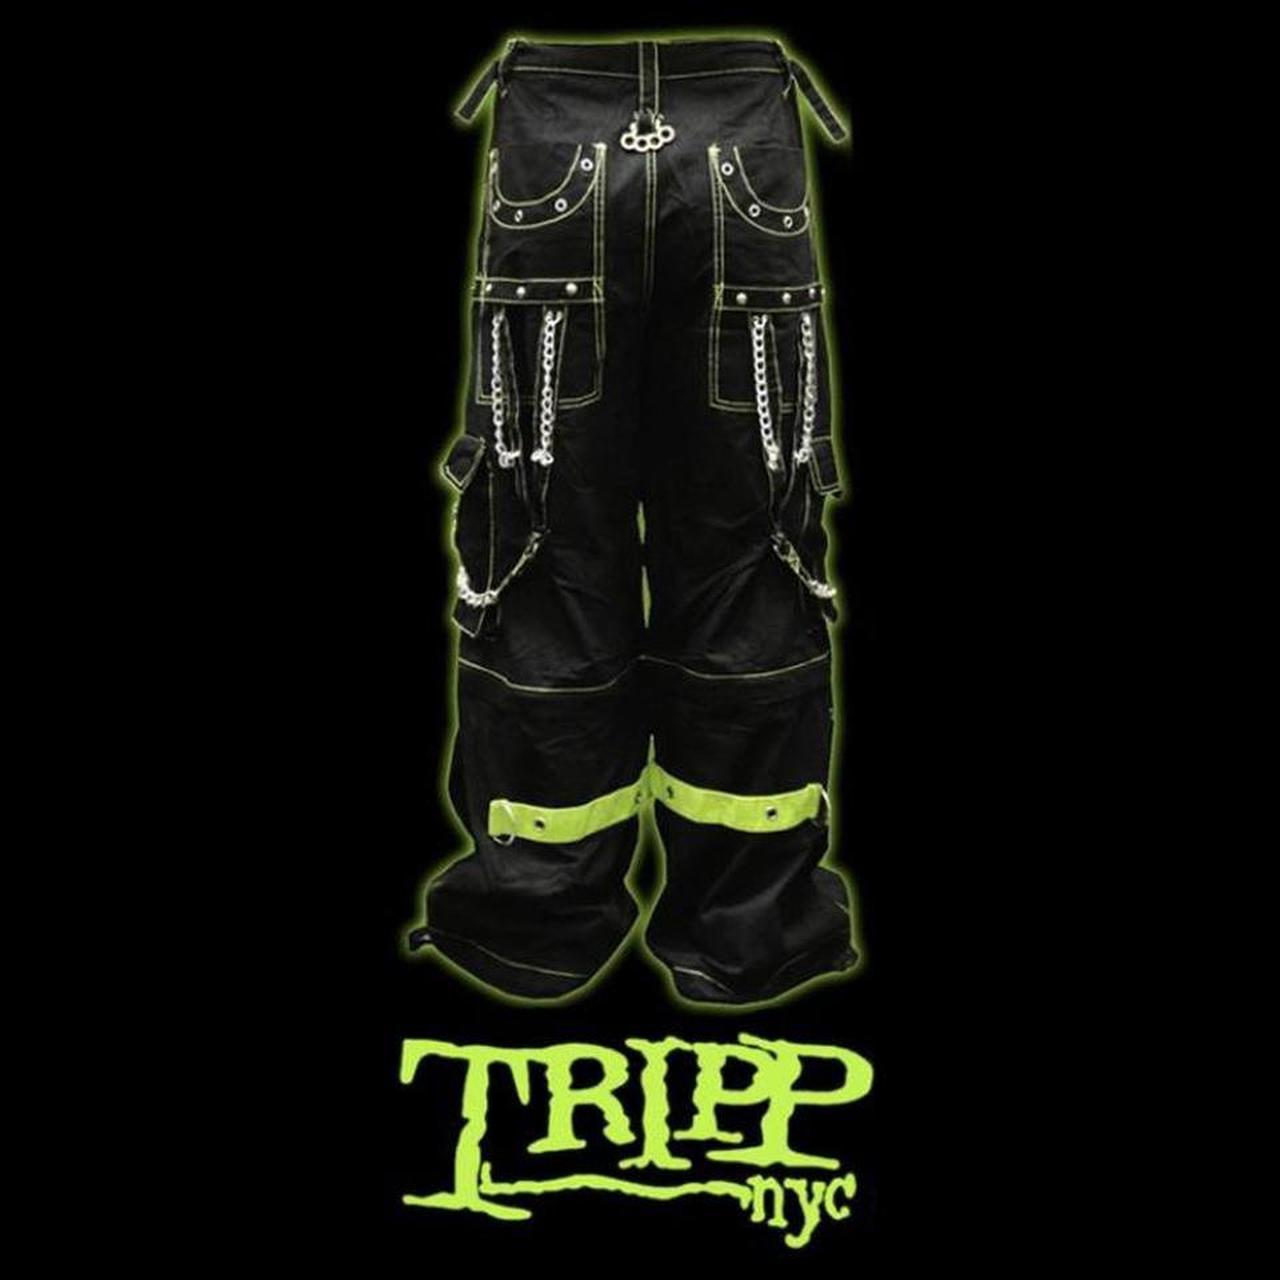 Tripp nyc /rock/punk/goth, Men's Fashion, Bottoms, Jeans on Carousell